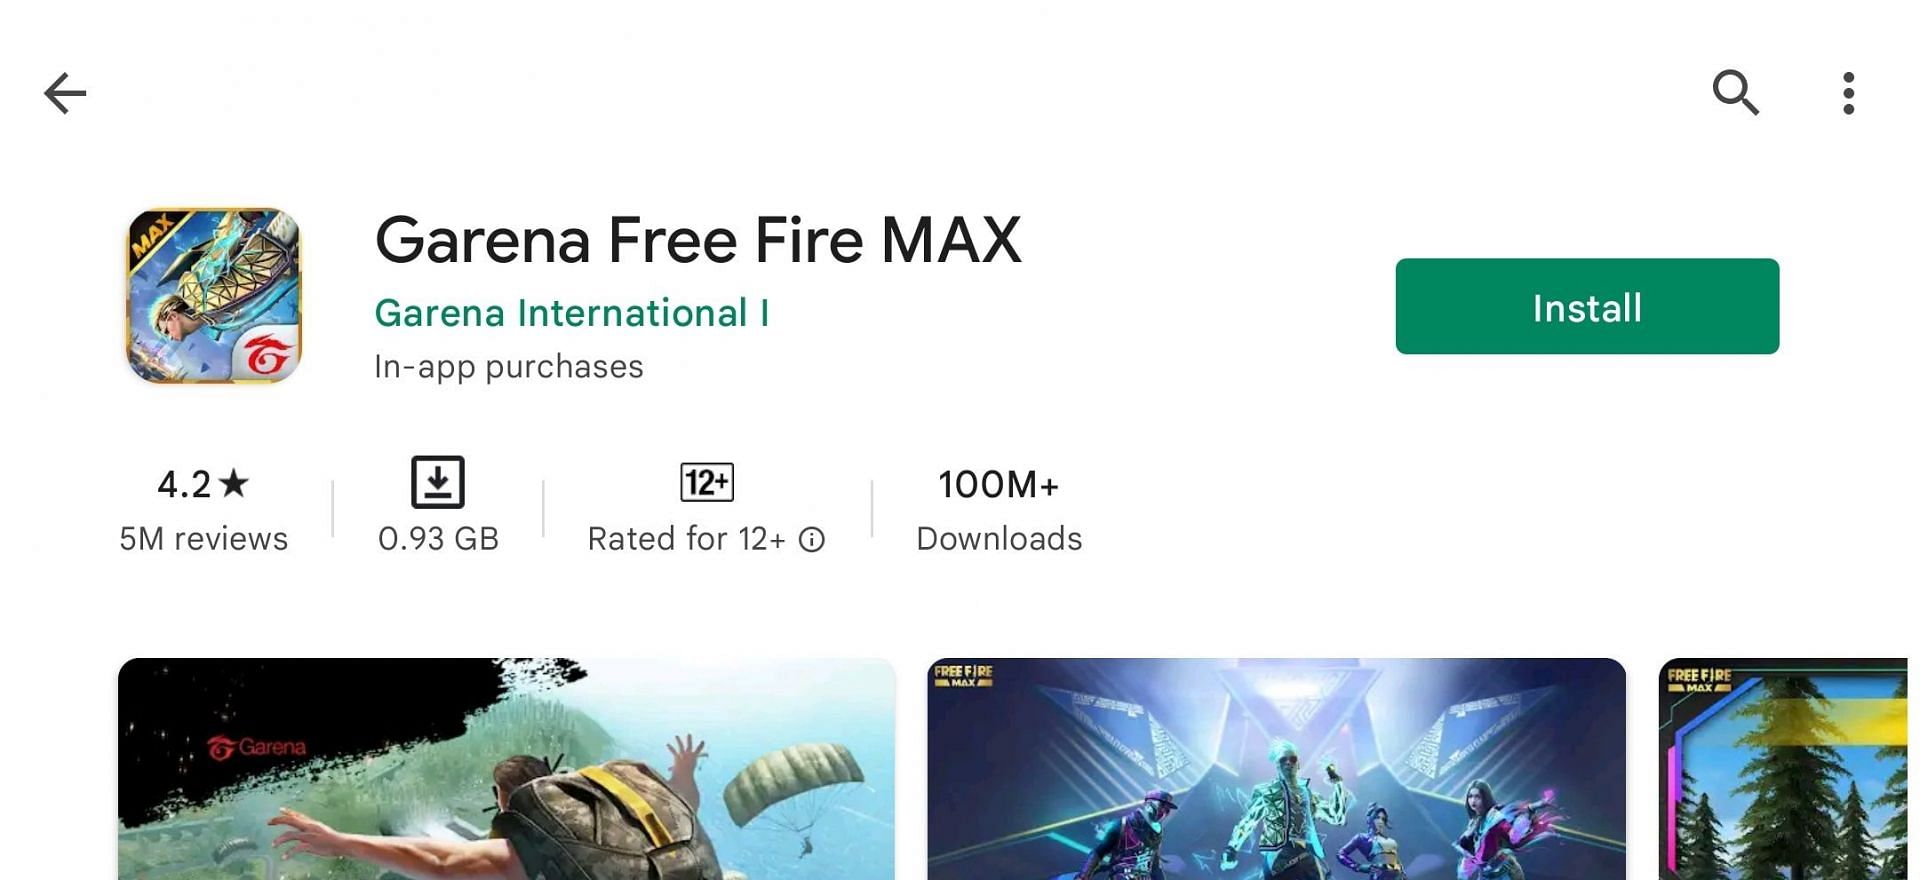 The MAX version still seems to be available (Image via Google Play Store)